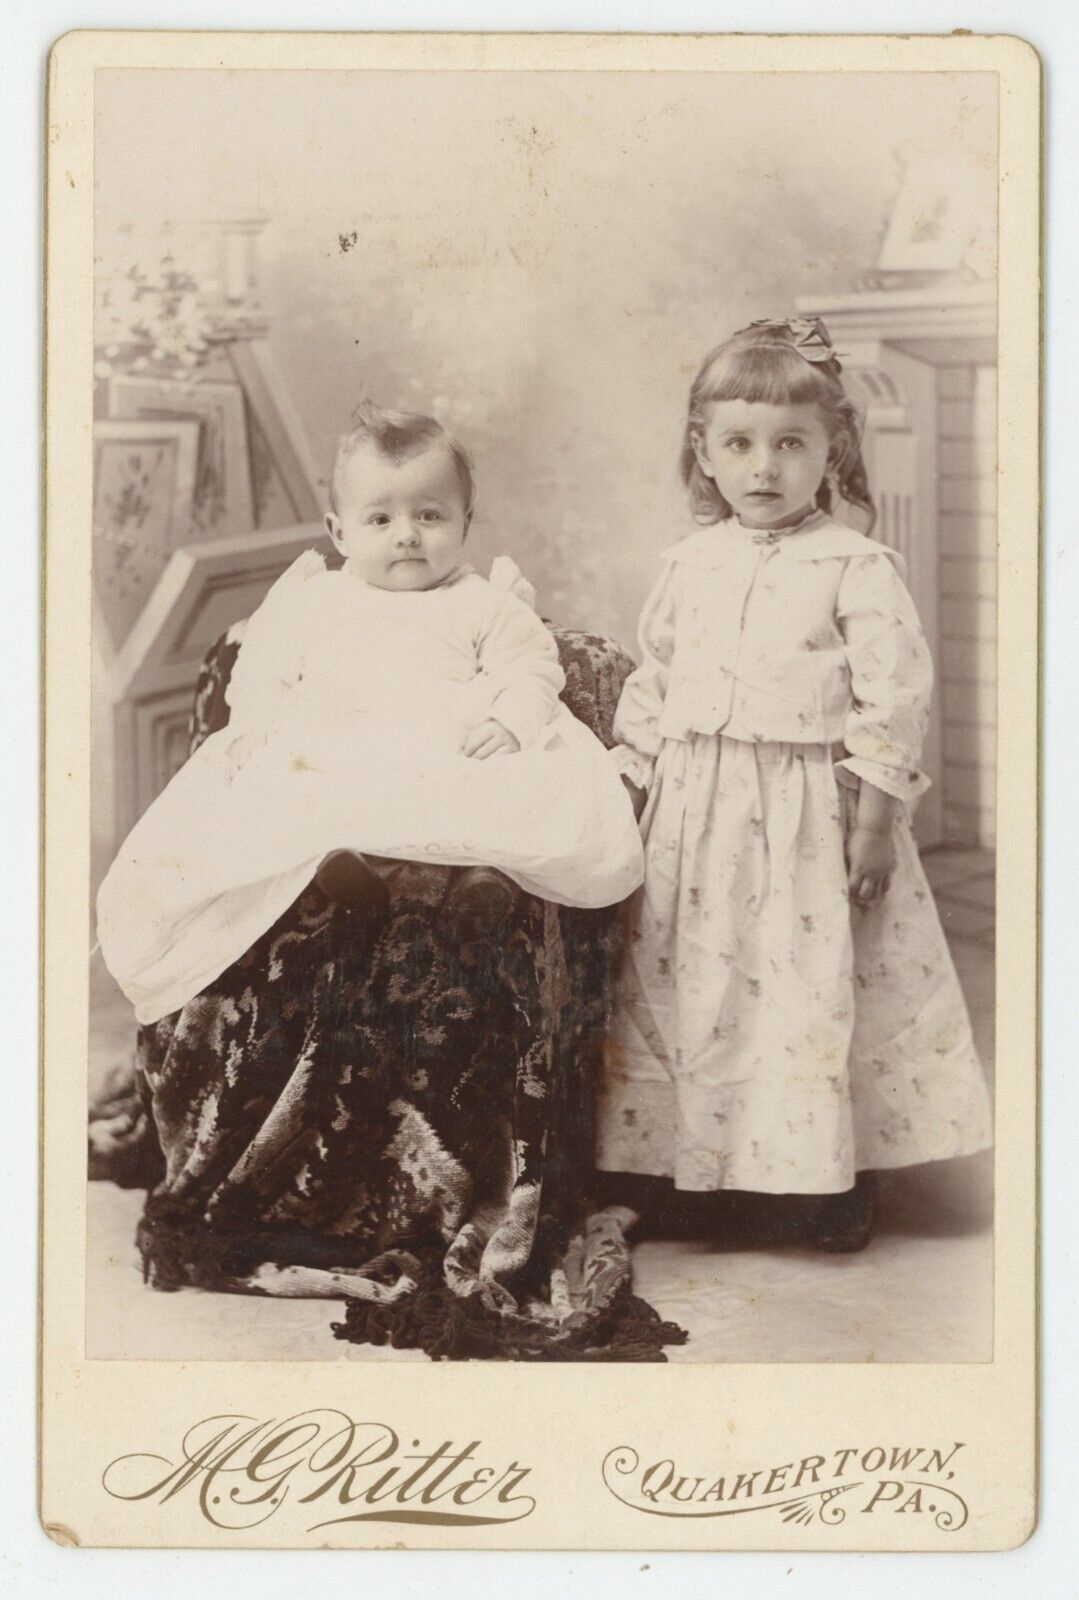 Antique c1880s Cabinet Card Adorable Children, Siblings Ritter Quakertown, PA